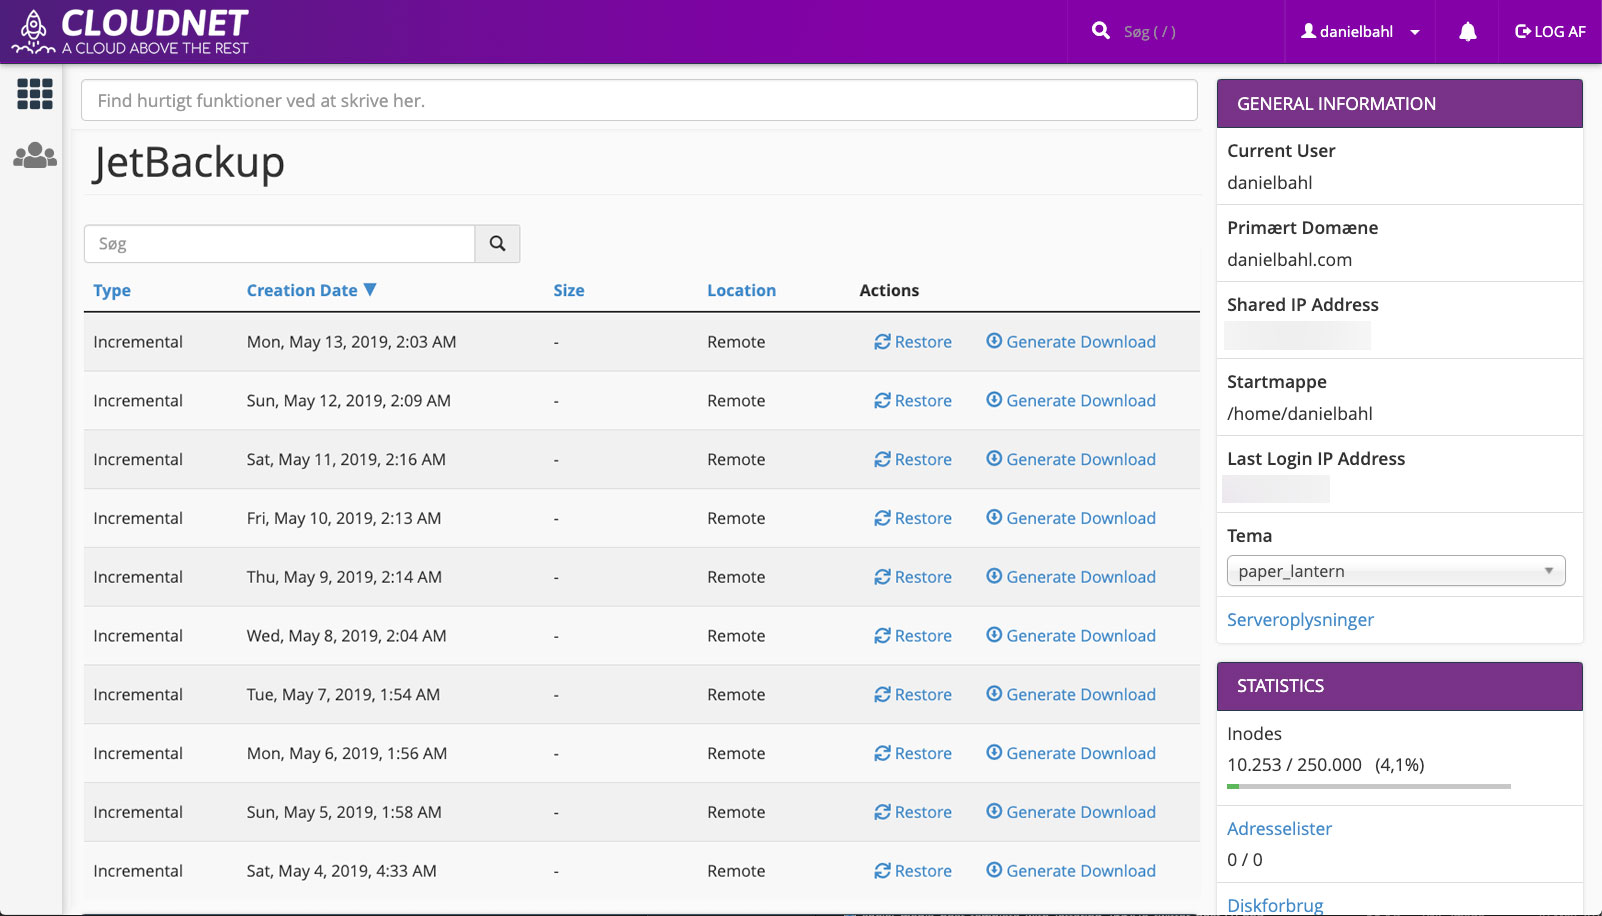 Transparent Backup in Cloudnet cPanel